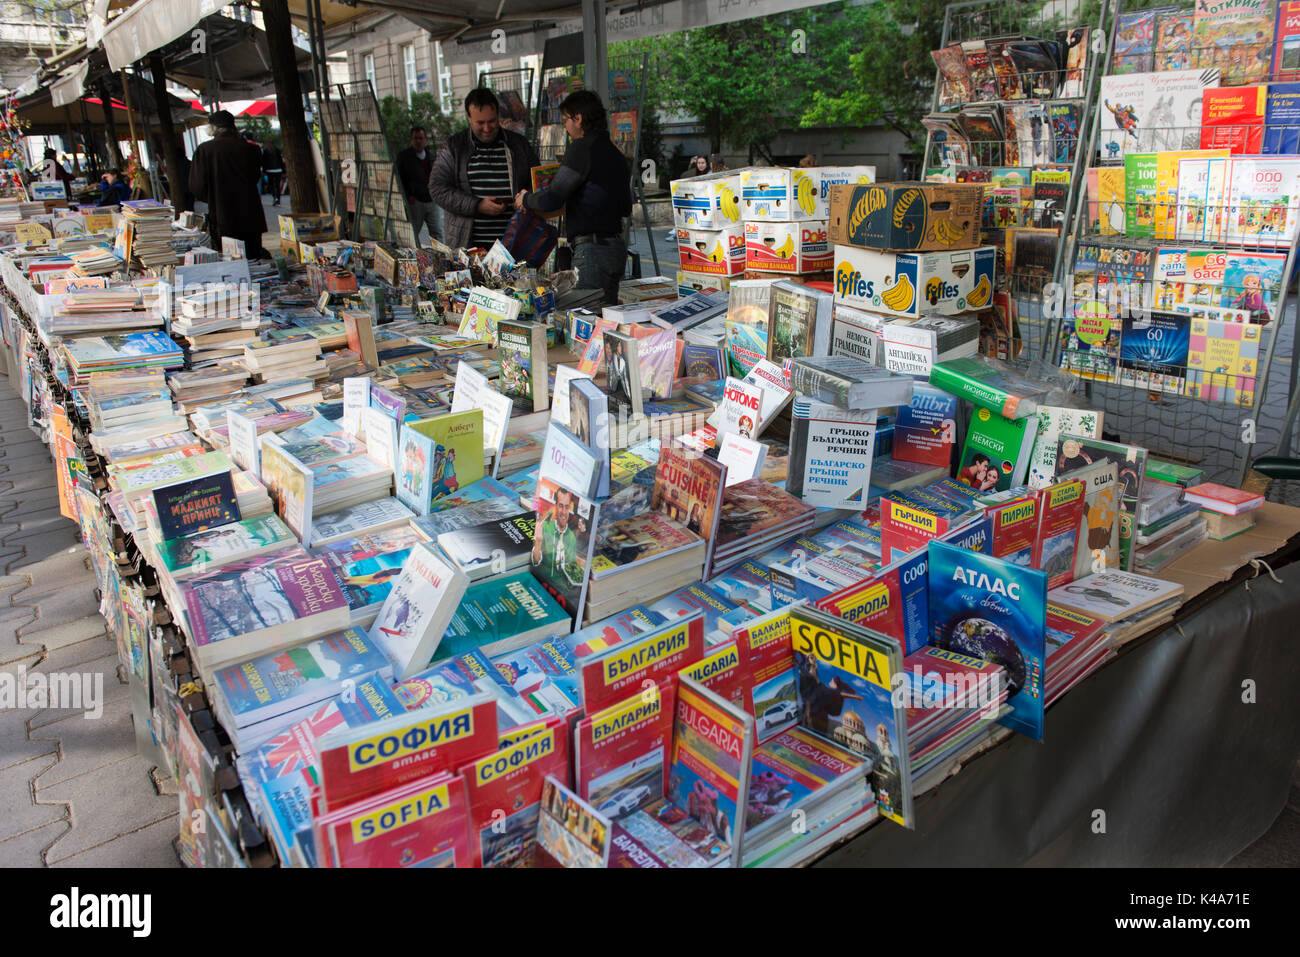 Open air bookseller in central Sofia. Stock Photo